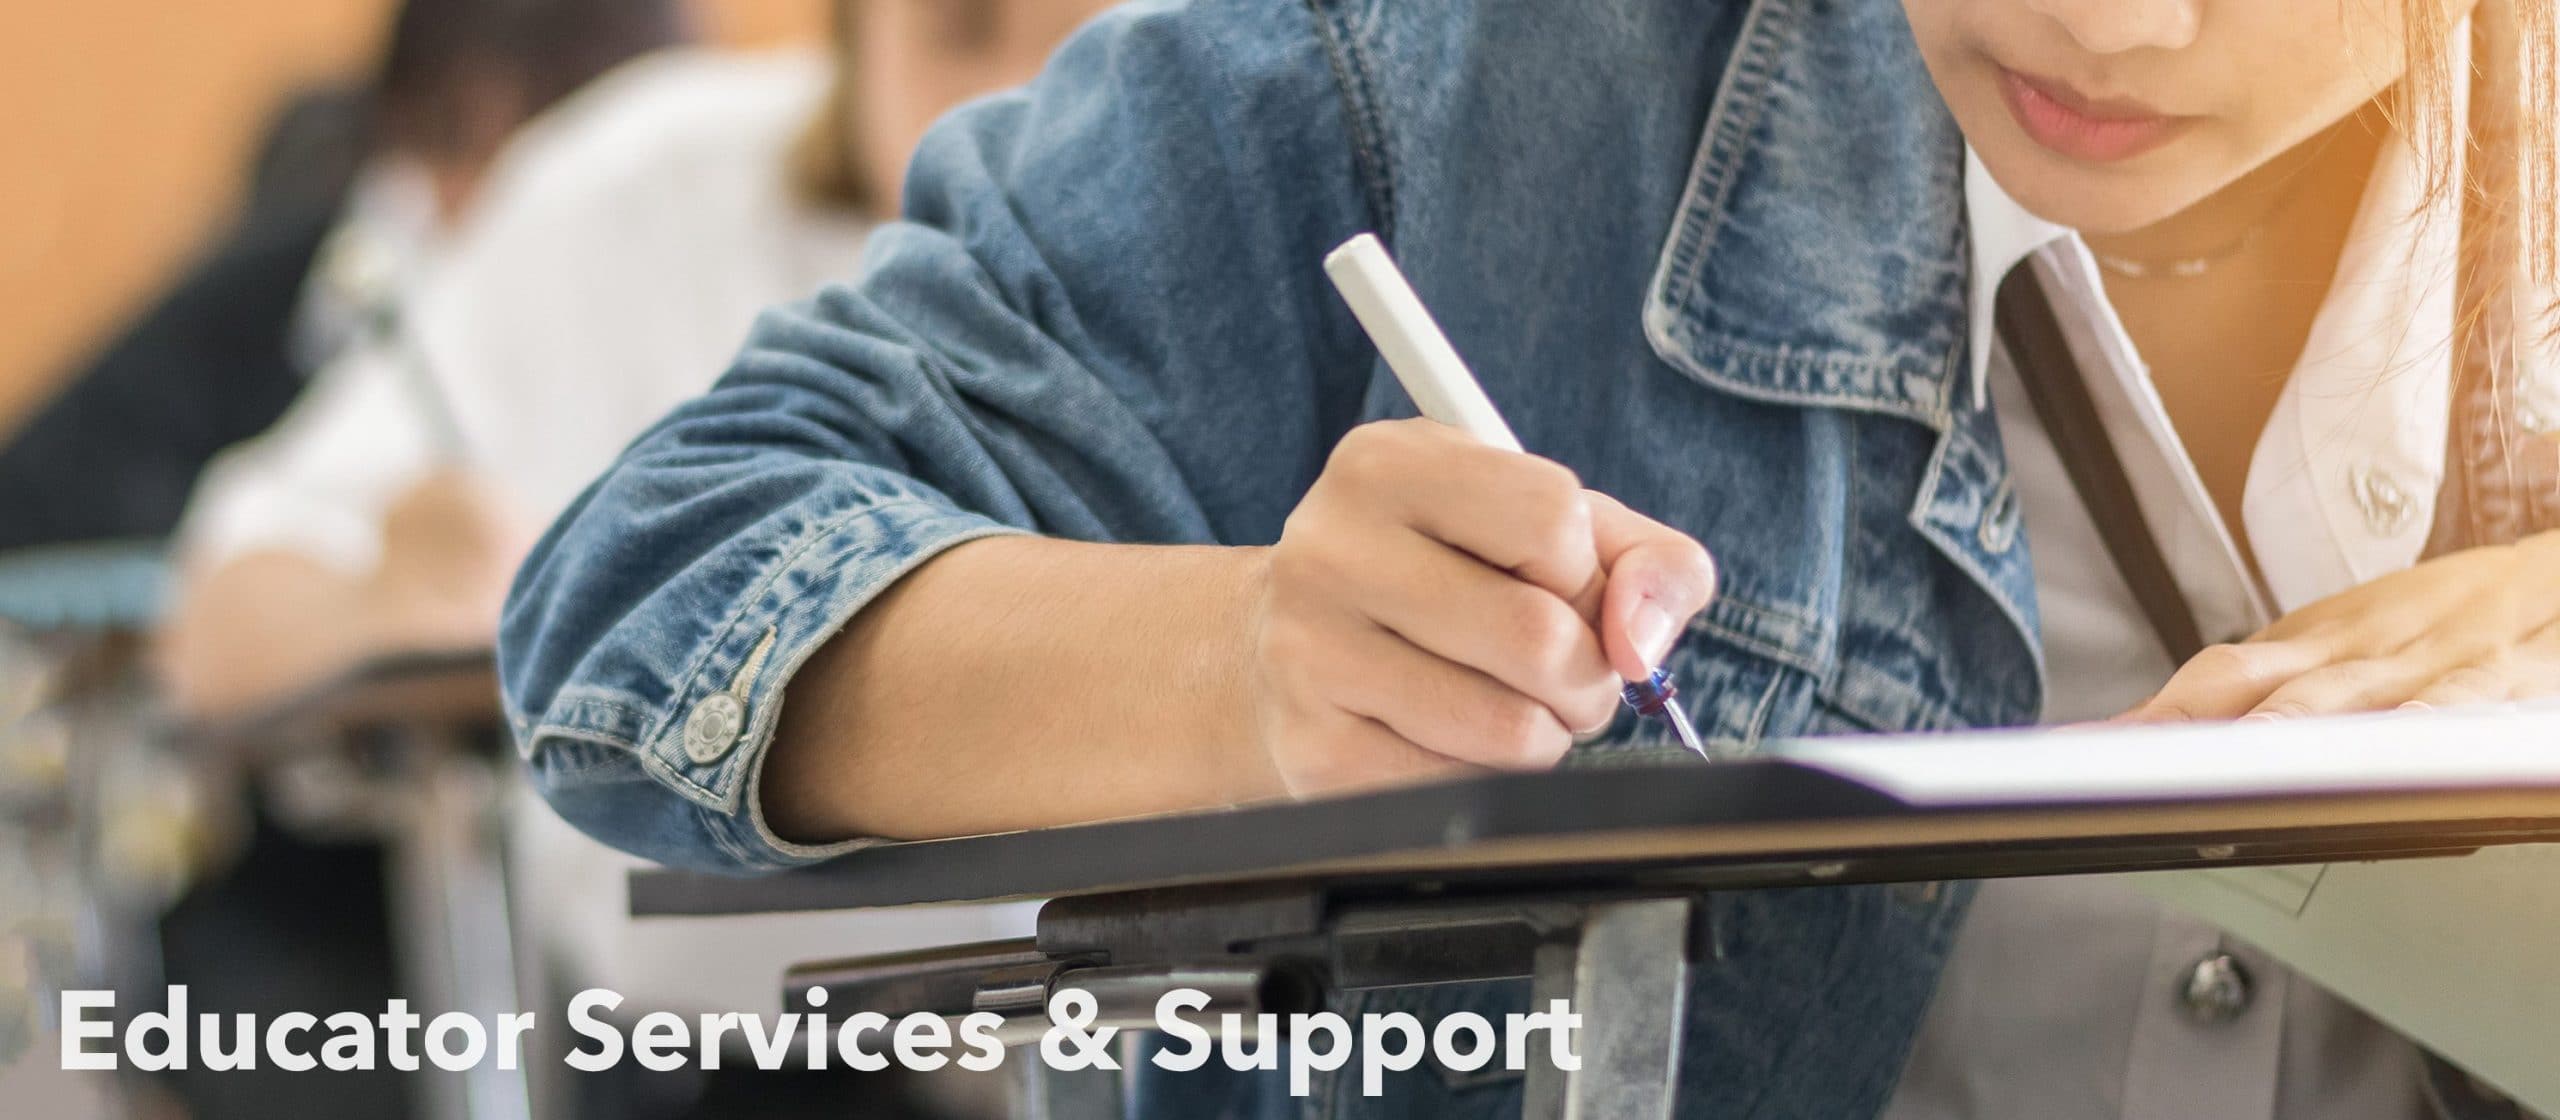 Educator Services & Support